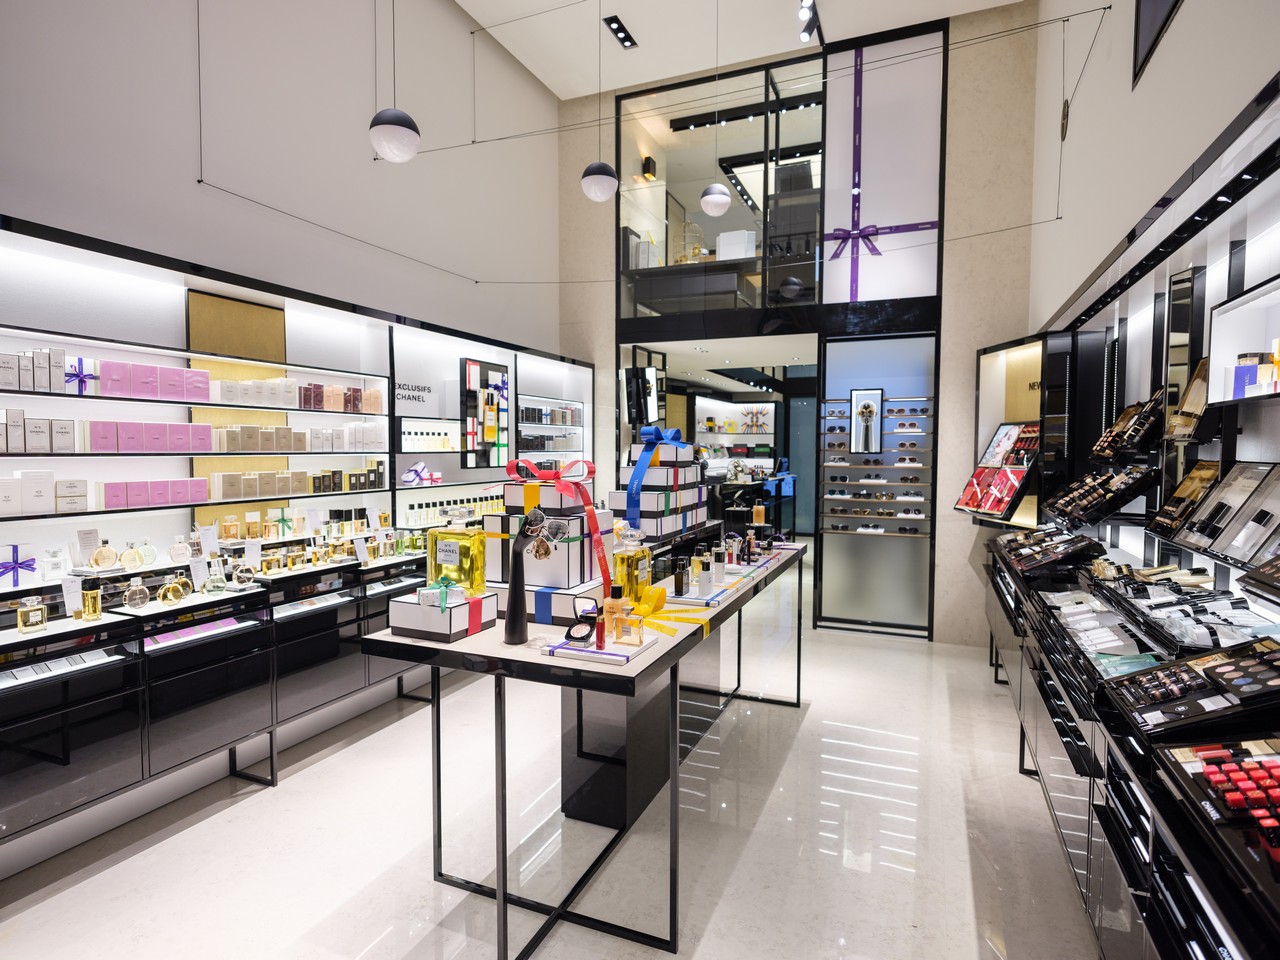 Chanel Fragrance & Beauty Boutique - Great Locations